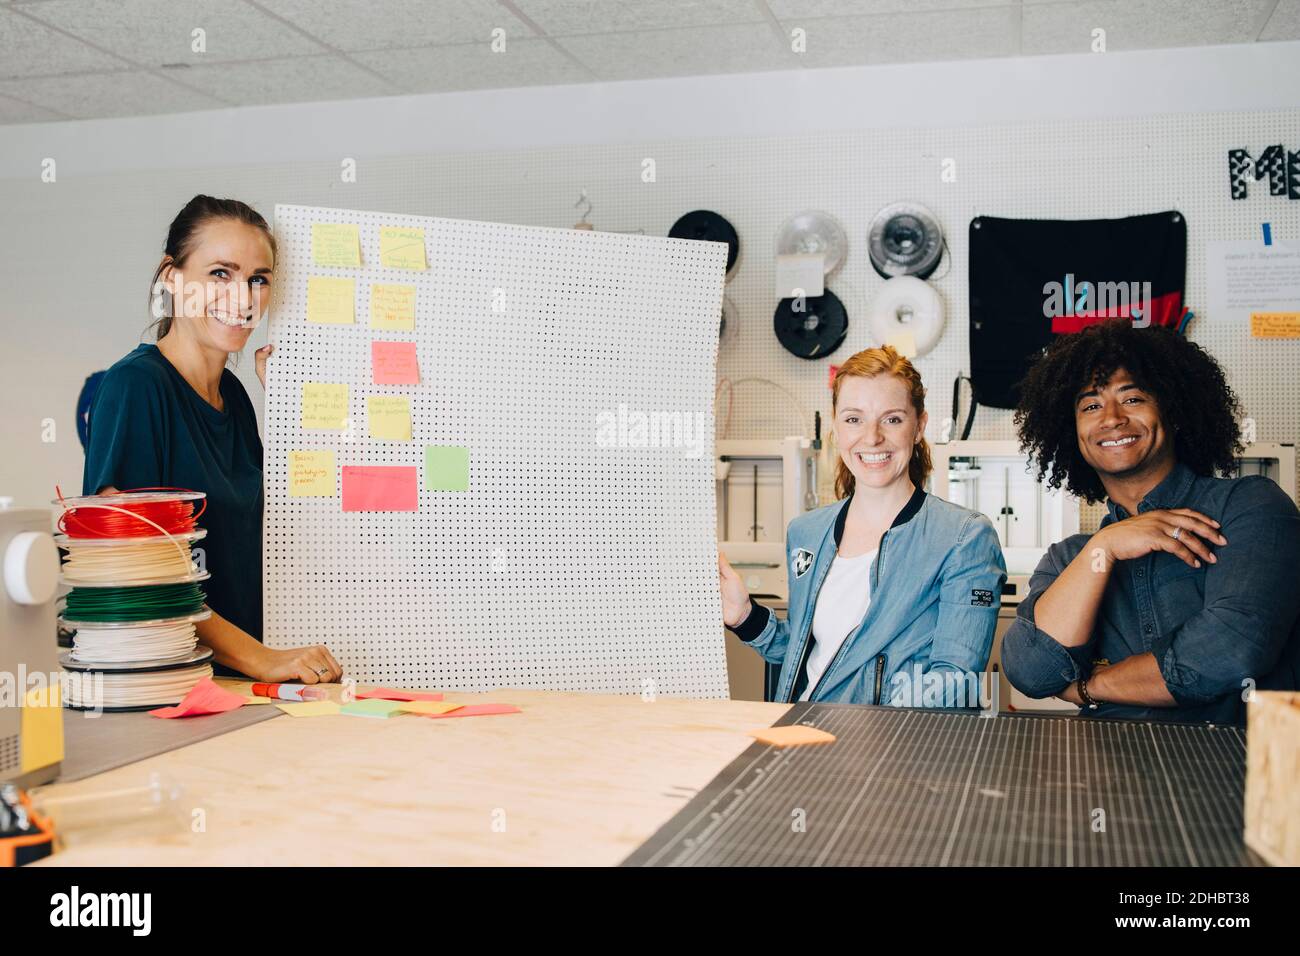 Portrait of smiling multi-ethnic technicians with adhesive notes on pegboard at creative office Stock Photo